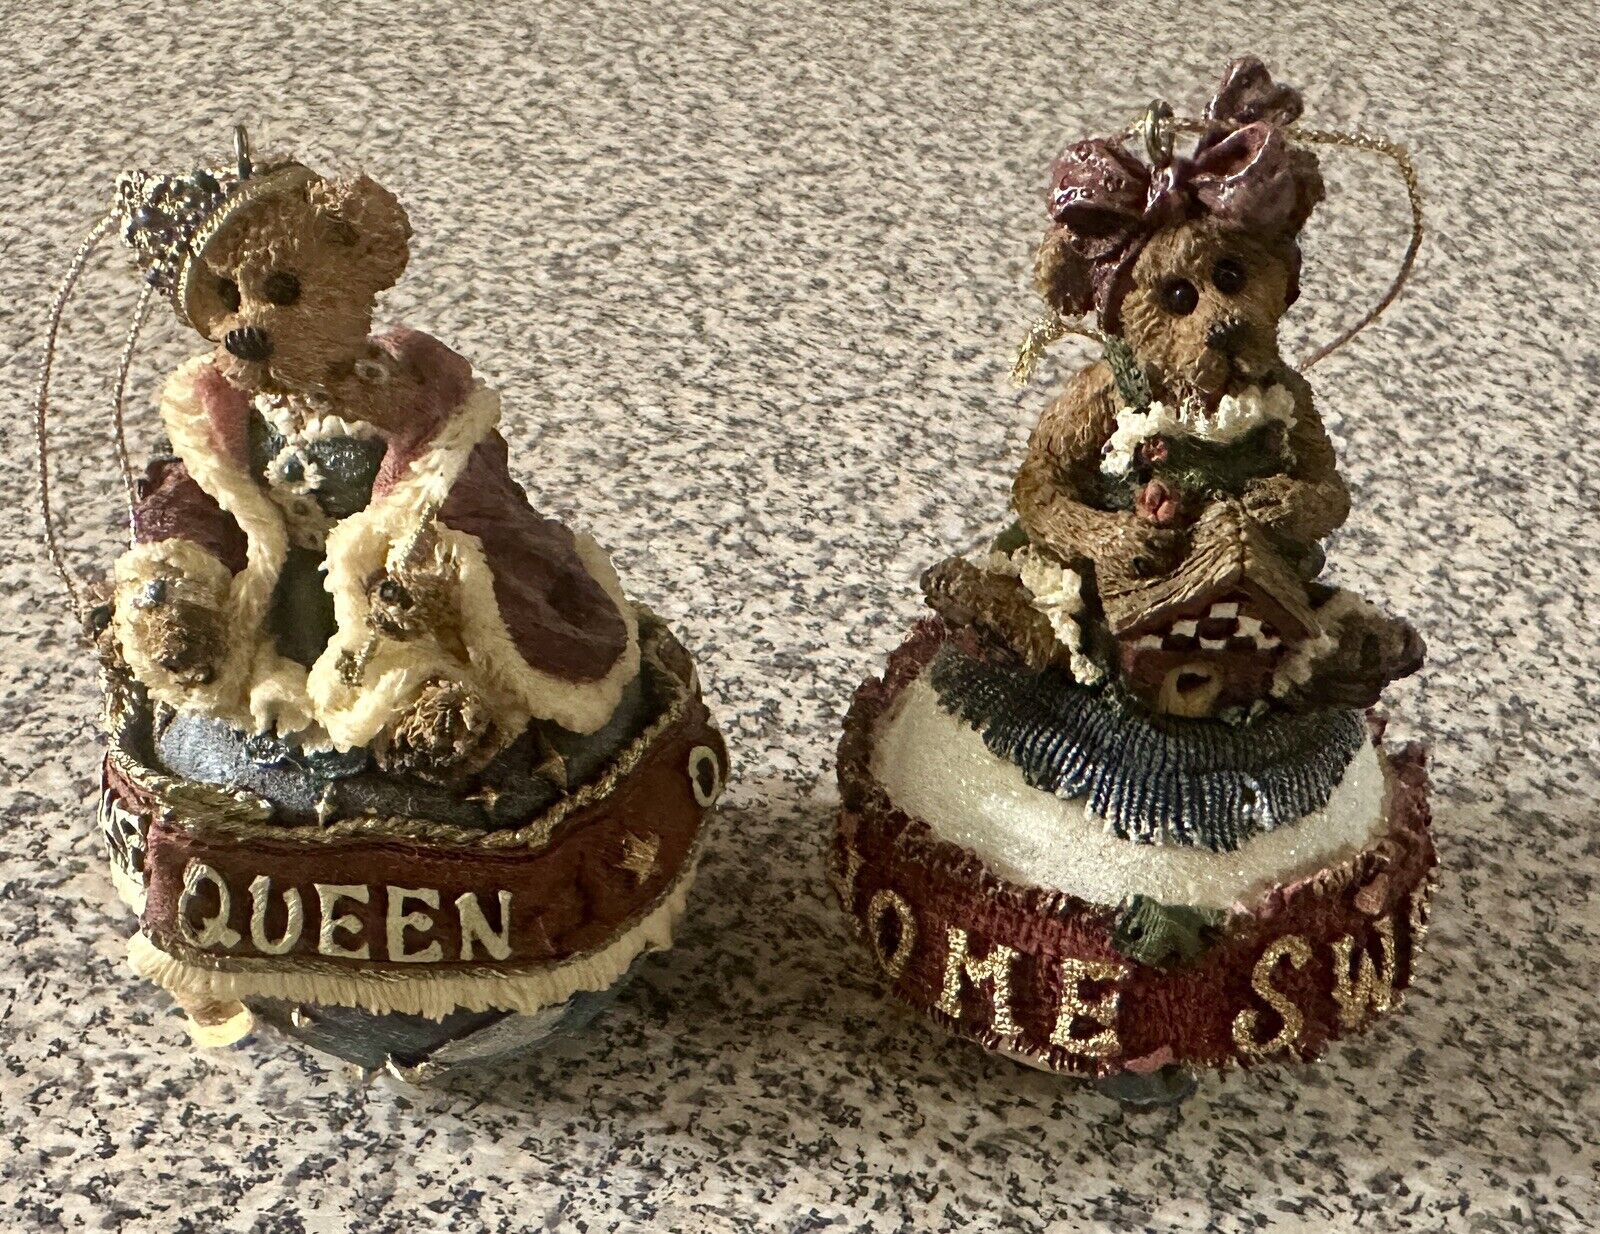 2 Vtg Boyd’s Bears Christmas Ornaments “The Queen Of The Universe” And Other